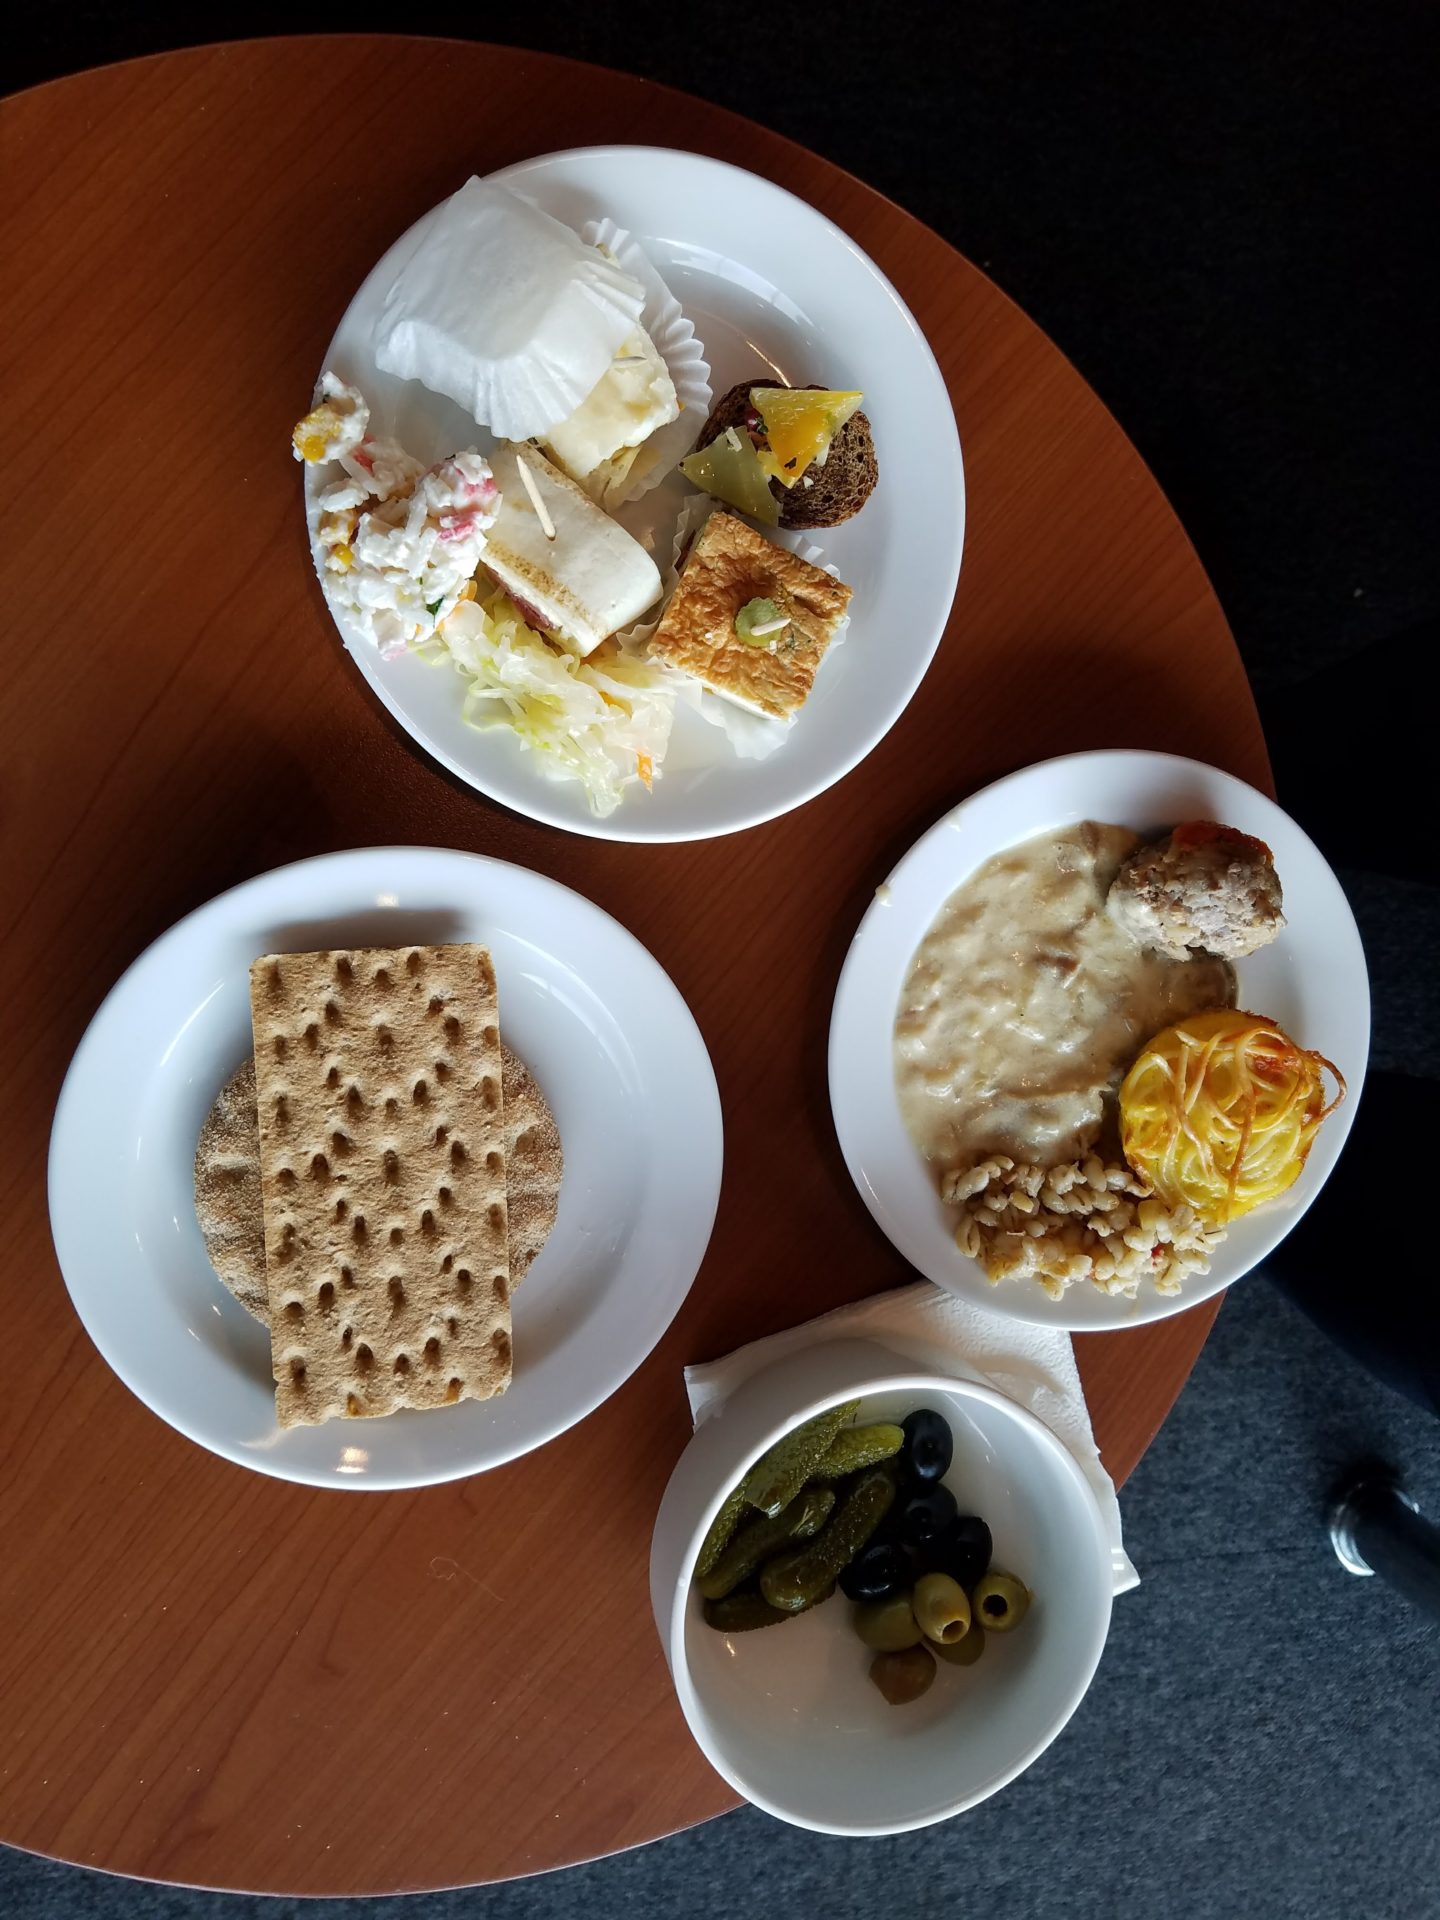 a group of plates of food on a table